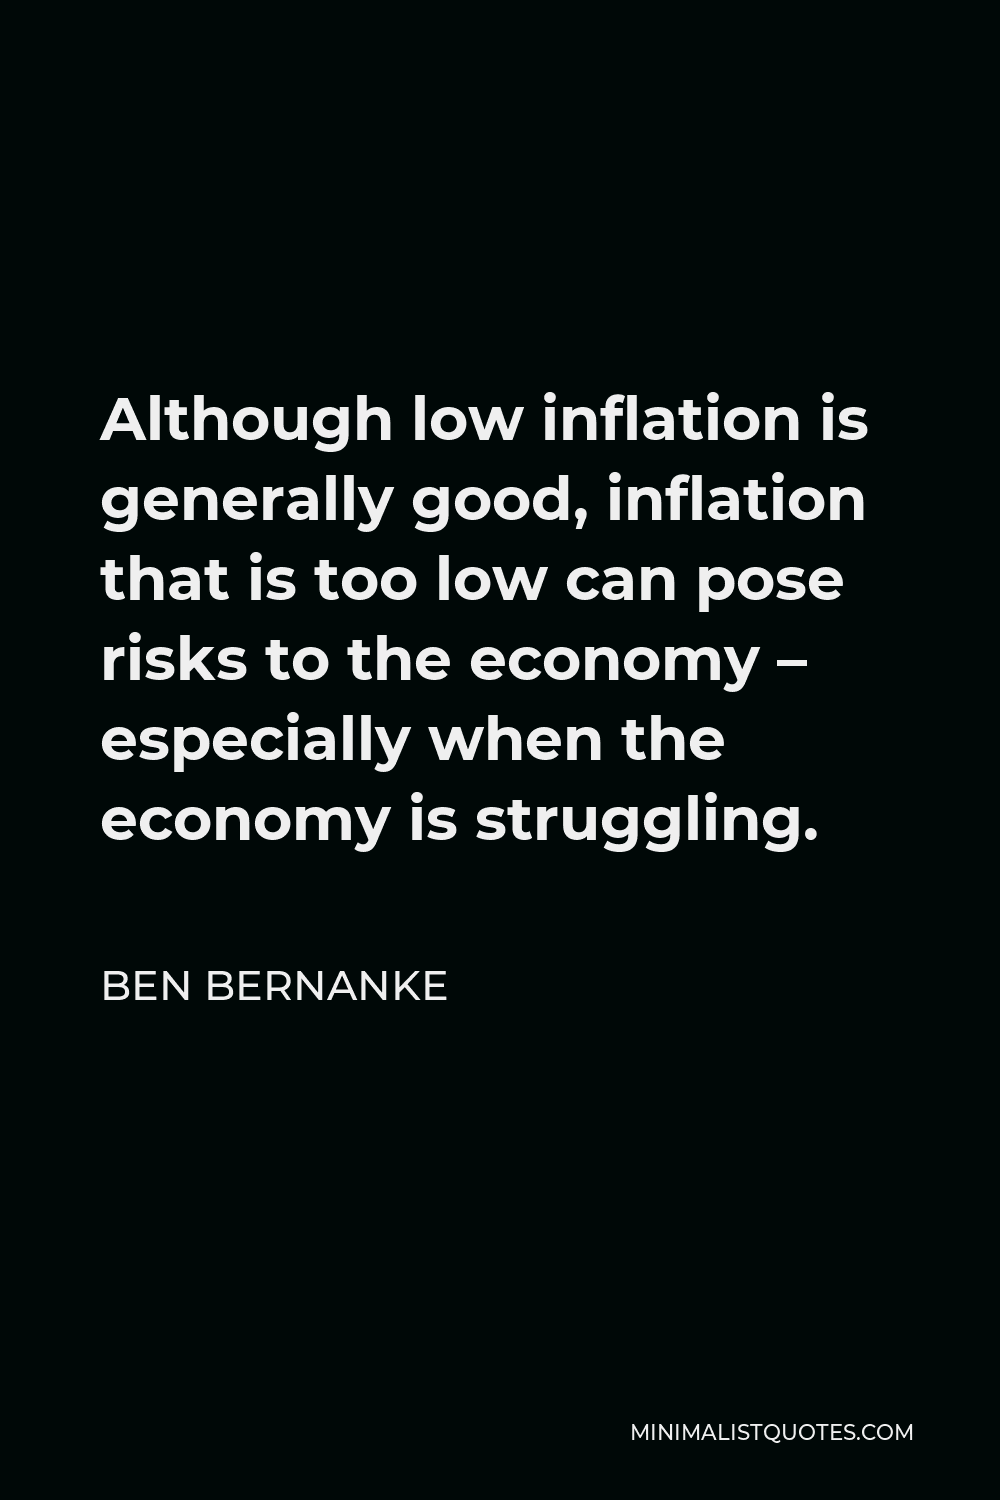 Ben Bernanke Quote - Although low inflation is generally good, inflation that is too low can pose risks to the economy – especially when the economy is struggling.